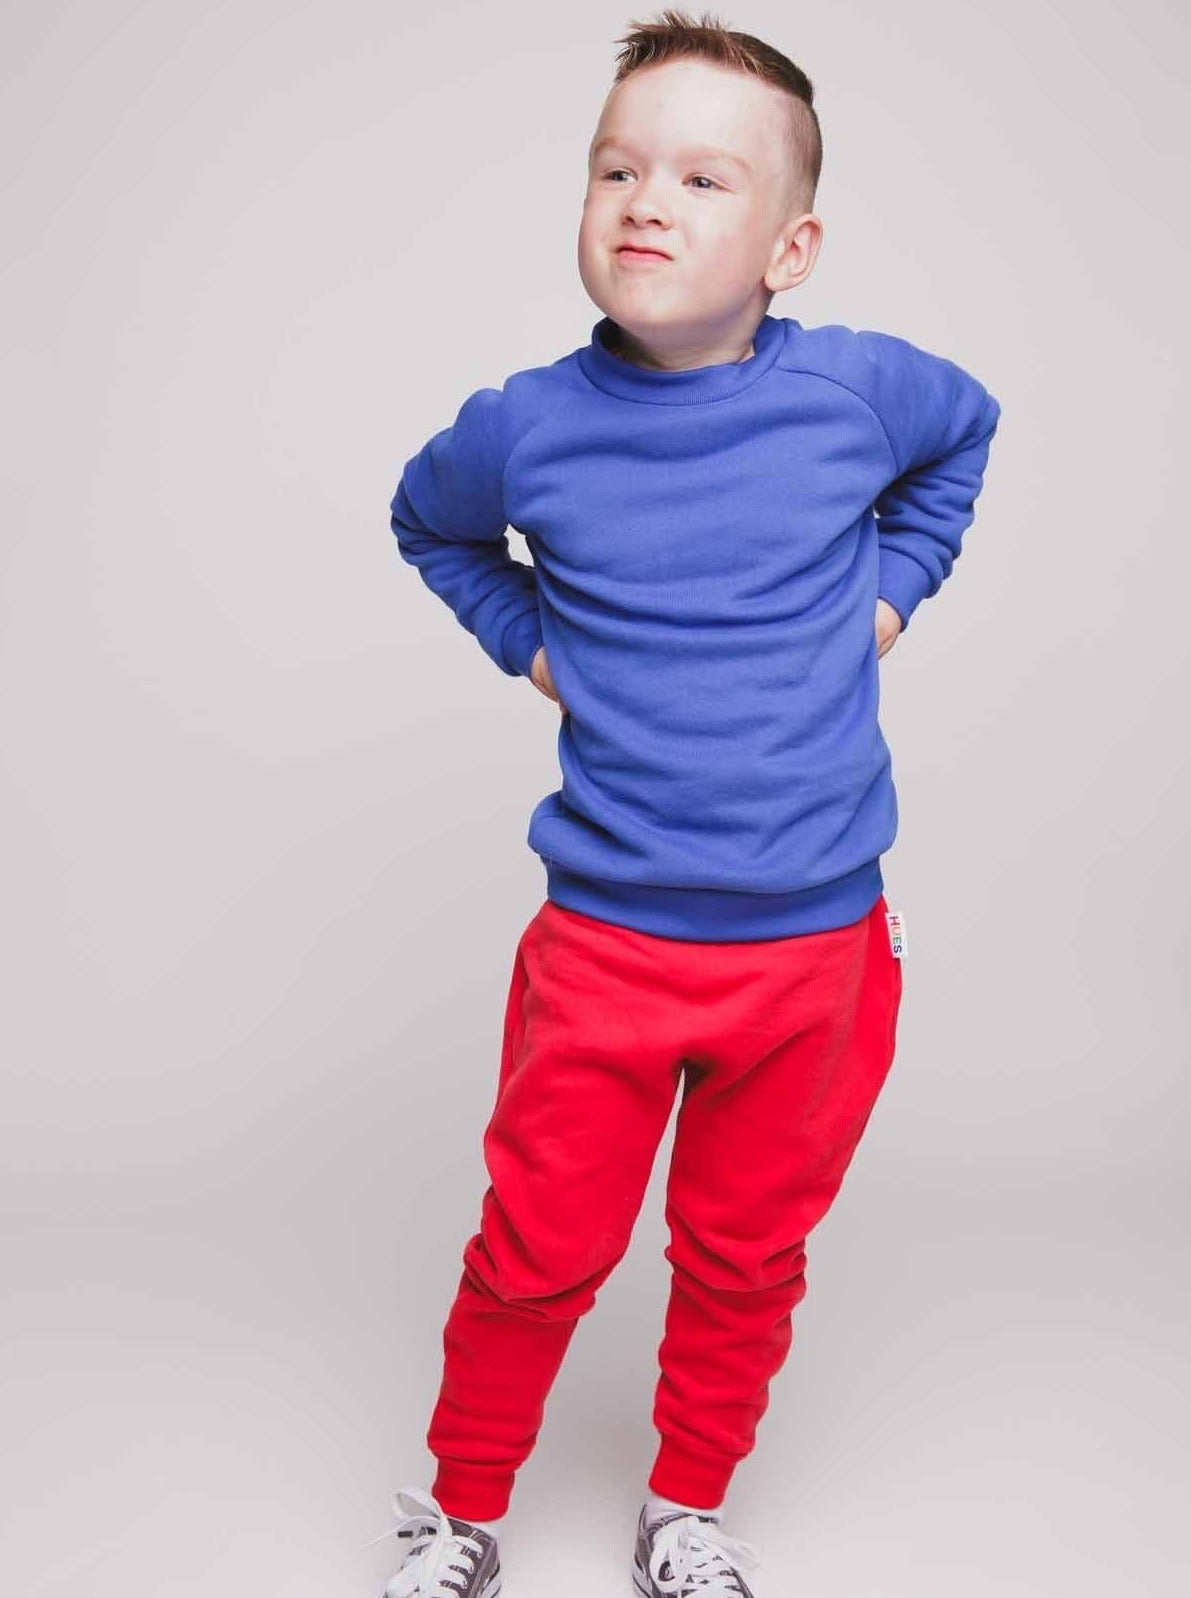 A boy wearing a blue jumper and red joggers - Hues Clothing